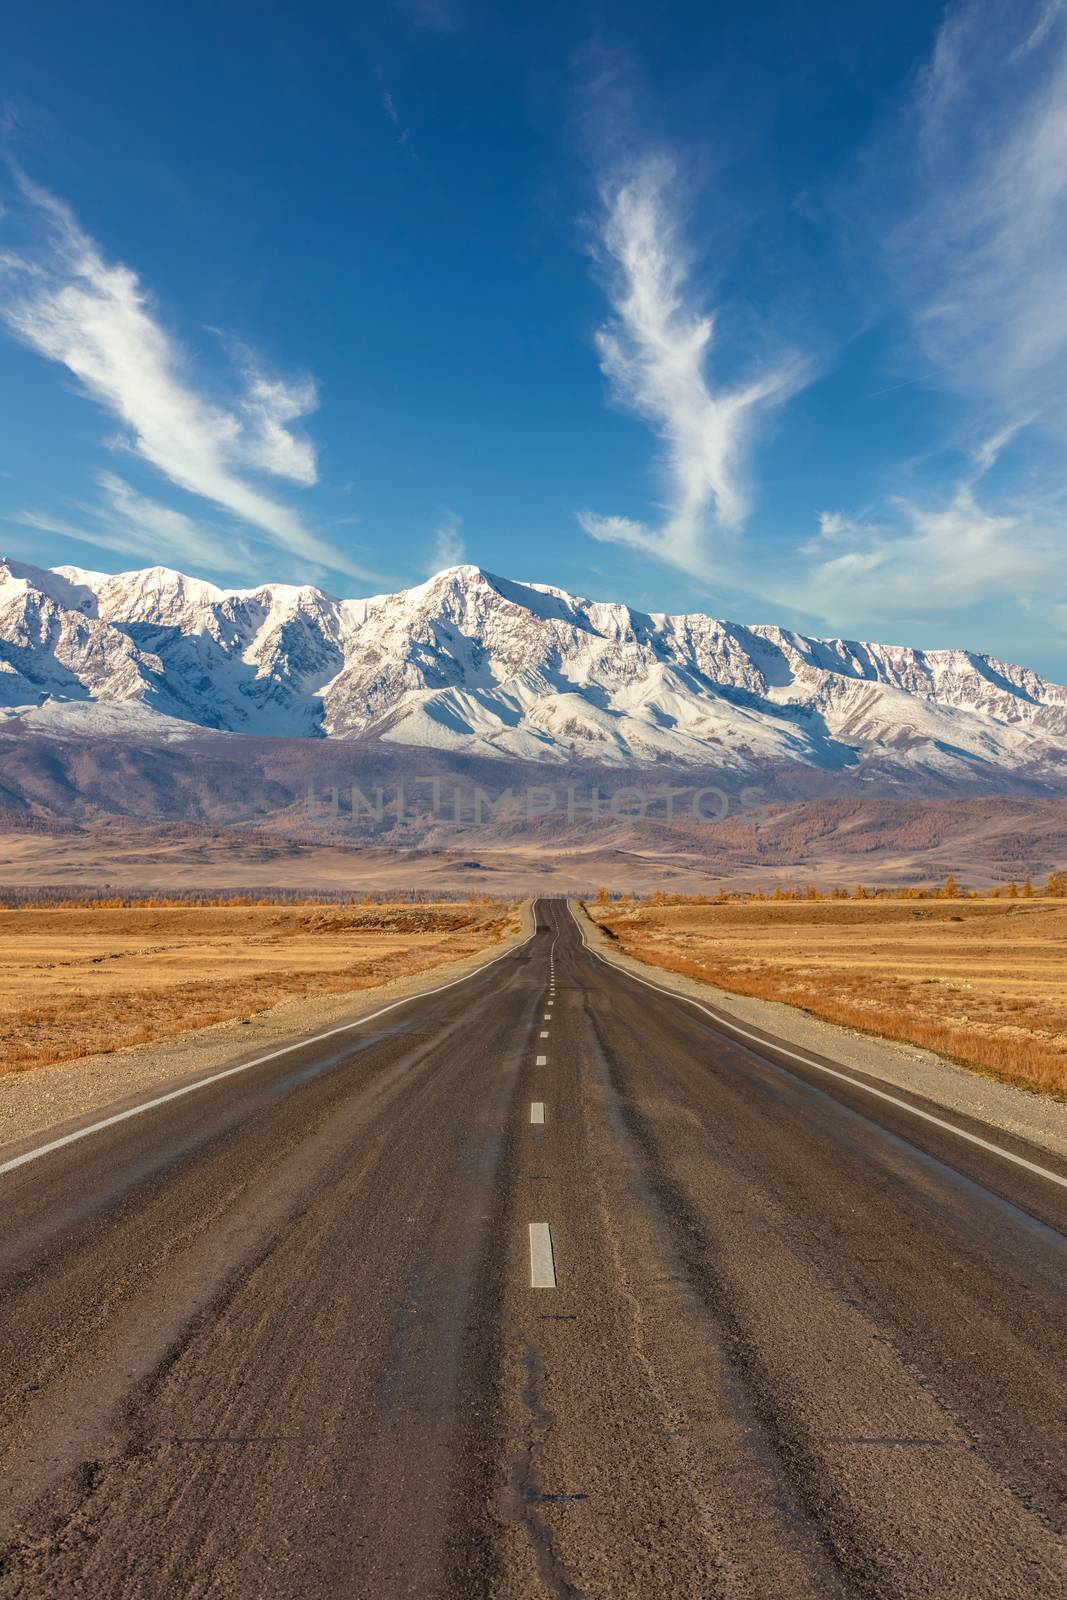 Portrait size shot of a straight empty highway leading to the snowy peaks of The Kuray mountain range. Beautiful blue cloudy sky as a background. Altai mountains, Siberia, Russia.